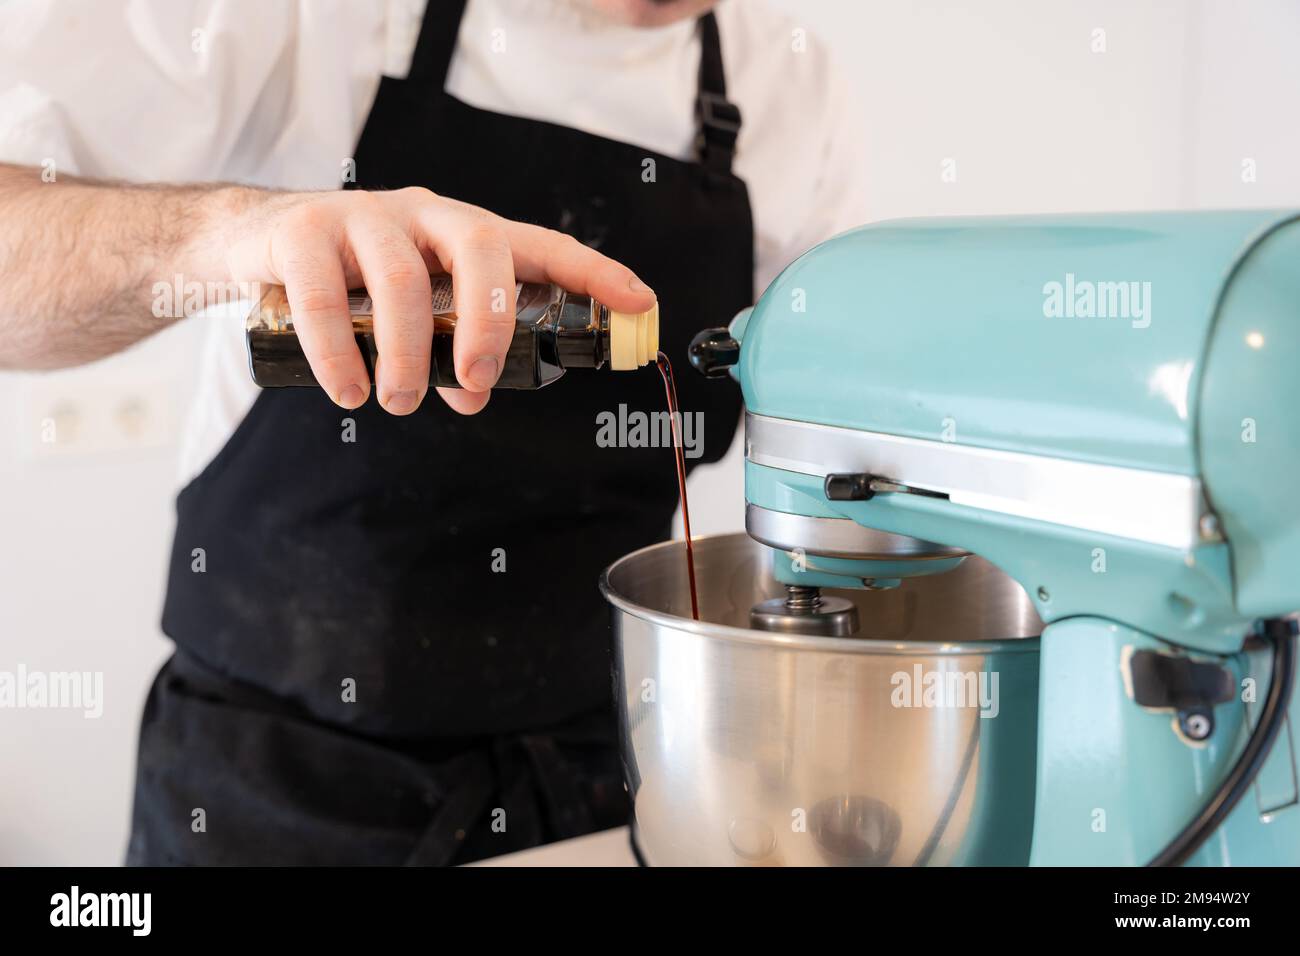 A man baker cooking a red velvet cake at home, preparing the cake by adding vanilla cuttlefish in the food processor, work at home Stock Photo